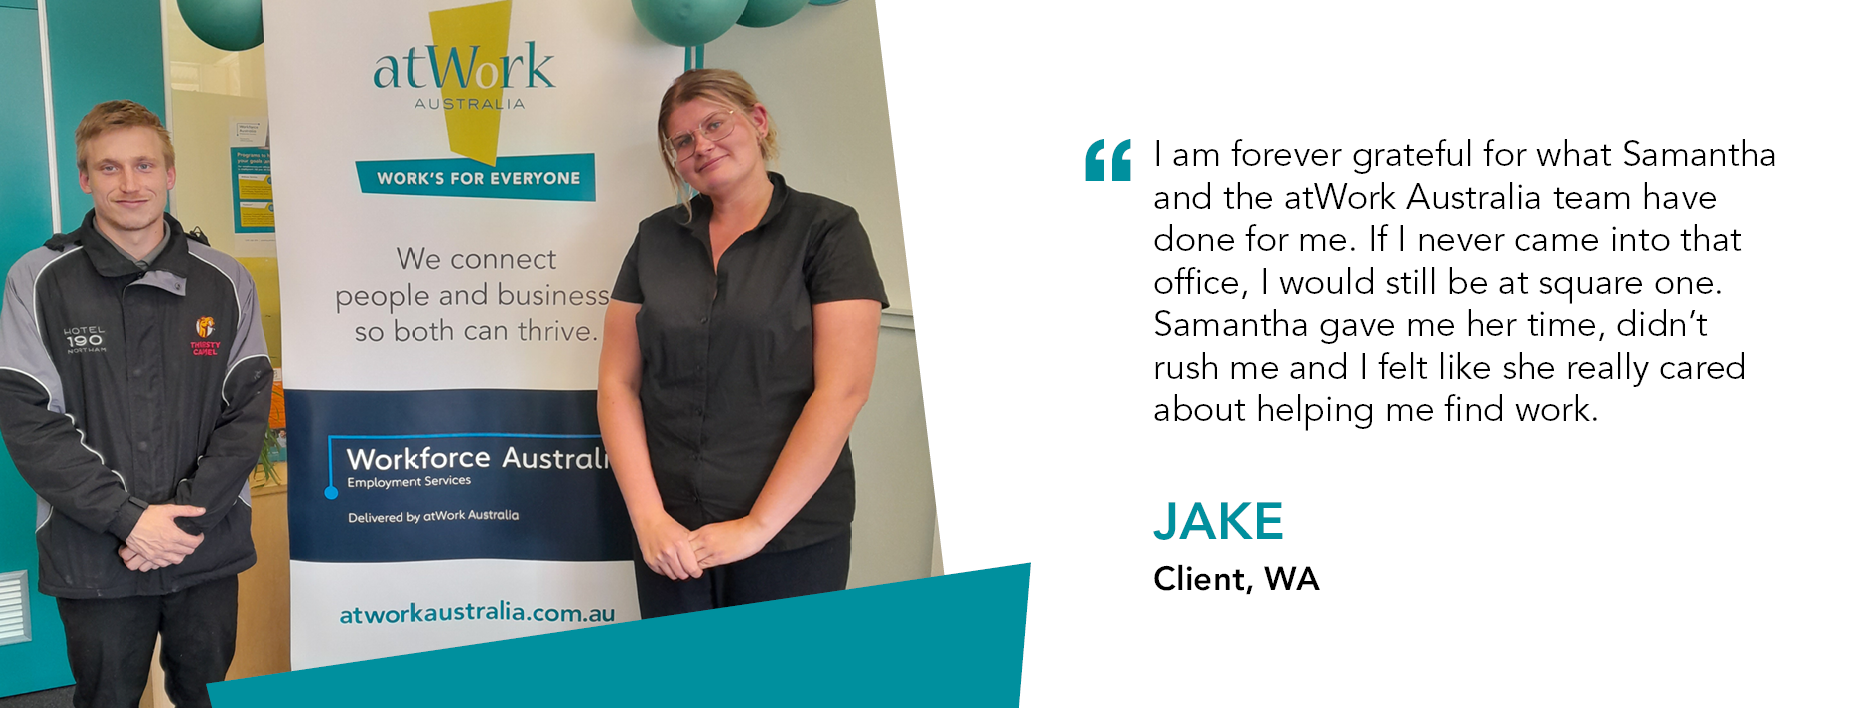 Quote reads "I am forever grateful for what Samantha and the atWork Australia team have done for me. If I never came into that office, I would still be at square one," Jake client Western Australia